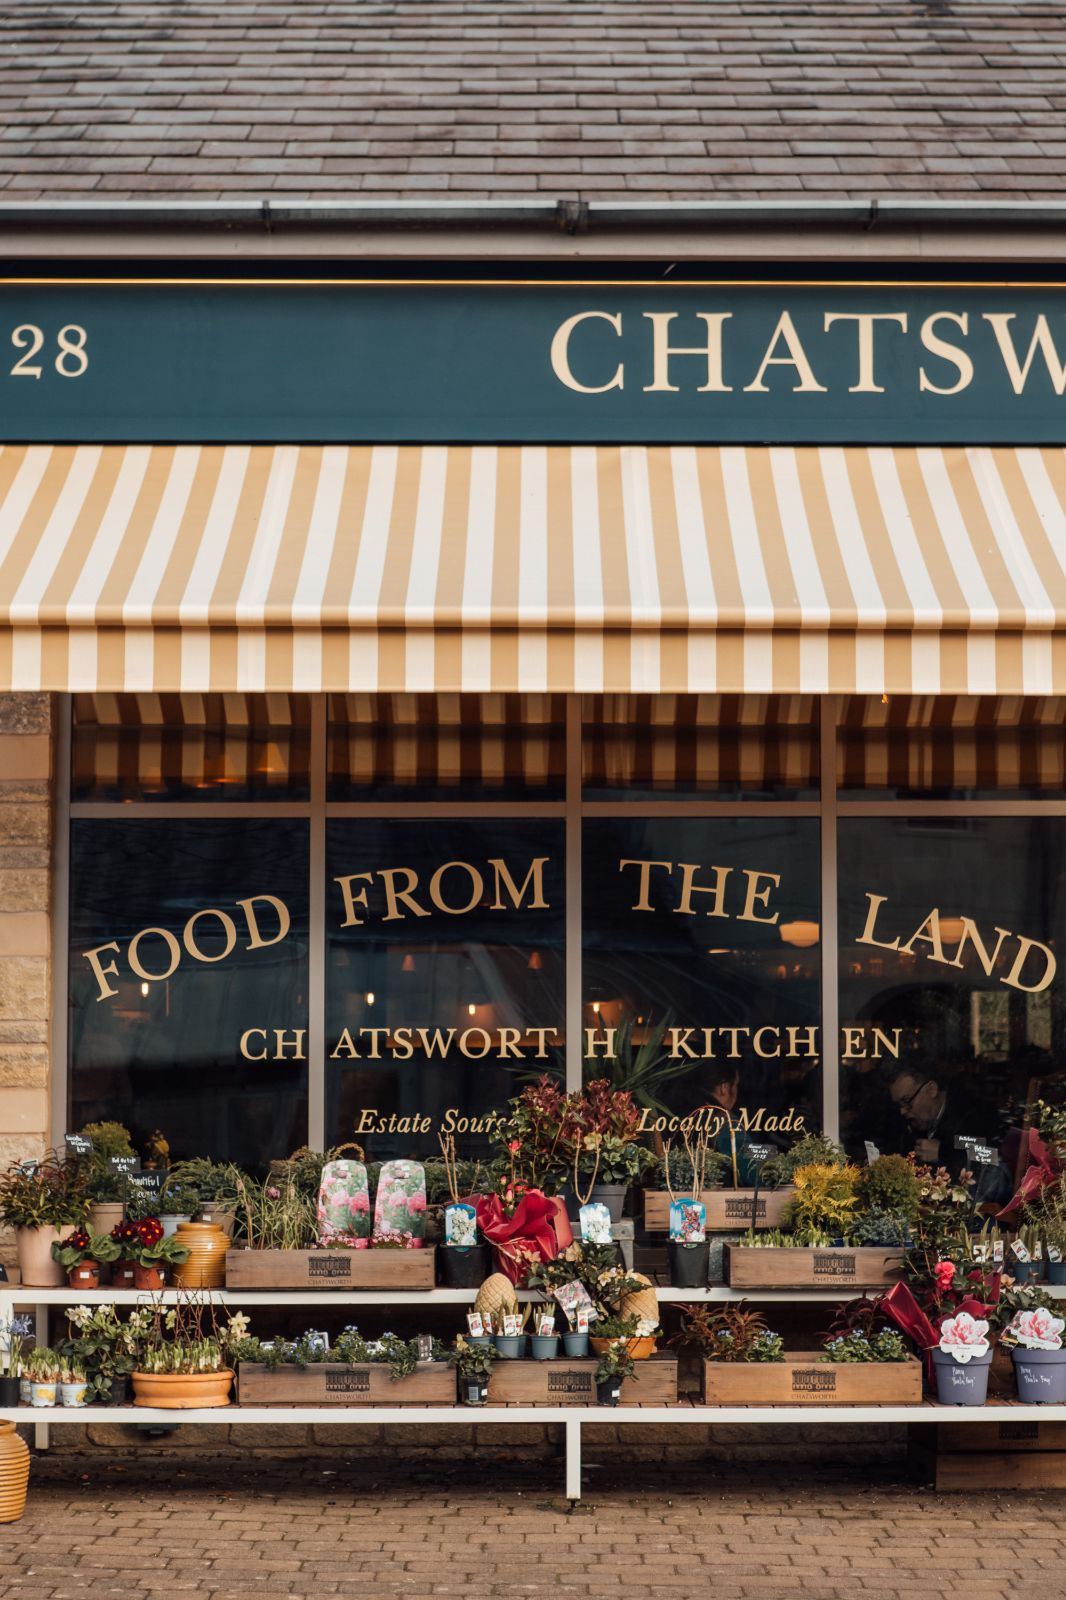 Chatsworth Kitchen facia. Sign writing on windows FOOD FROM THE LAND. Pots of flowers and shrubs outside the building.